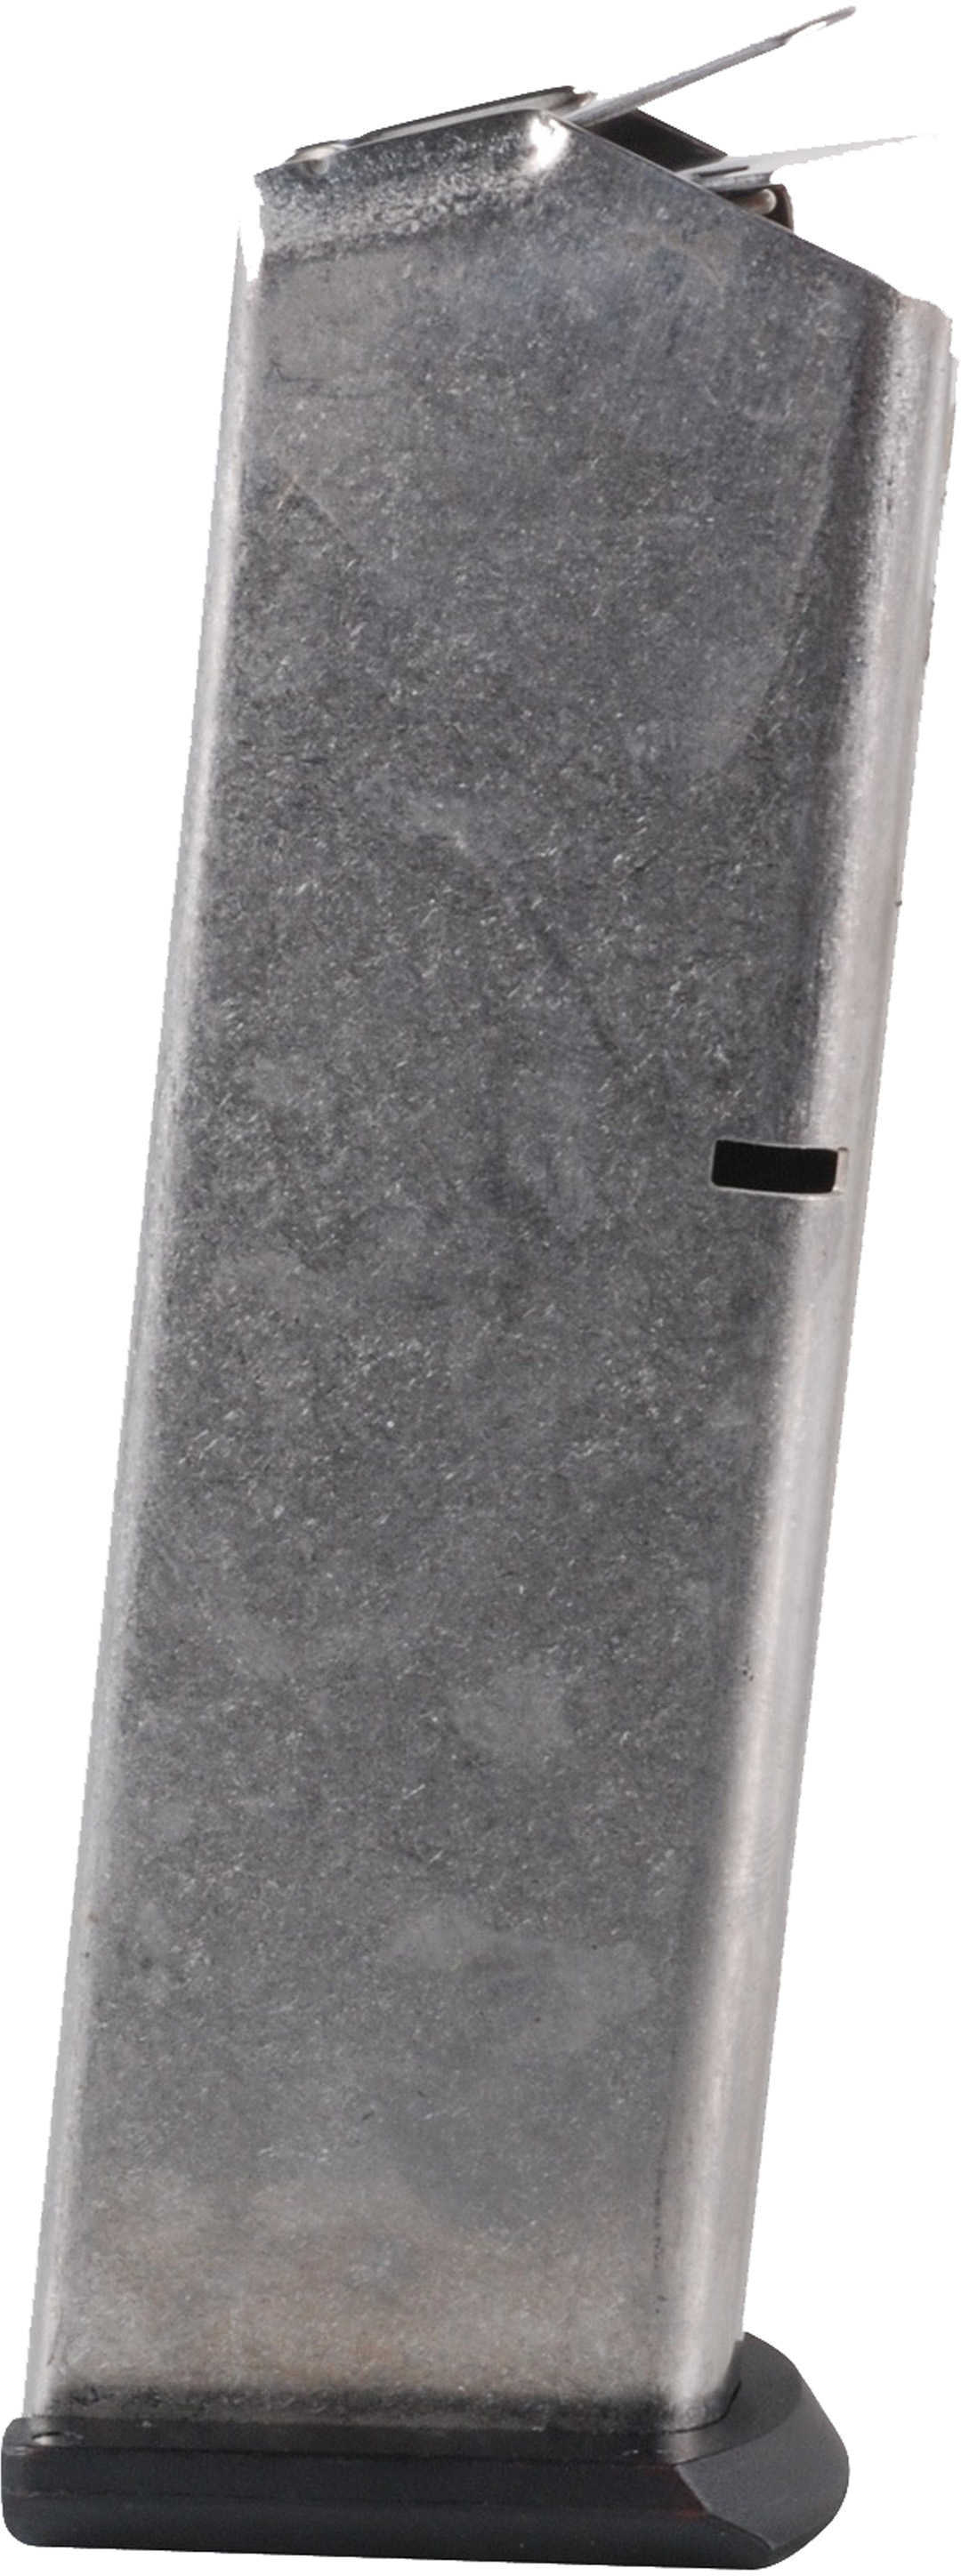 Ruger® Magazine P345 .45 ACP 8-ROUNDS Stainless